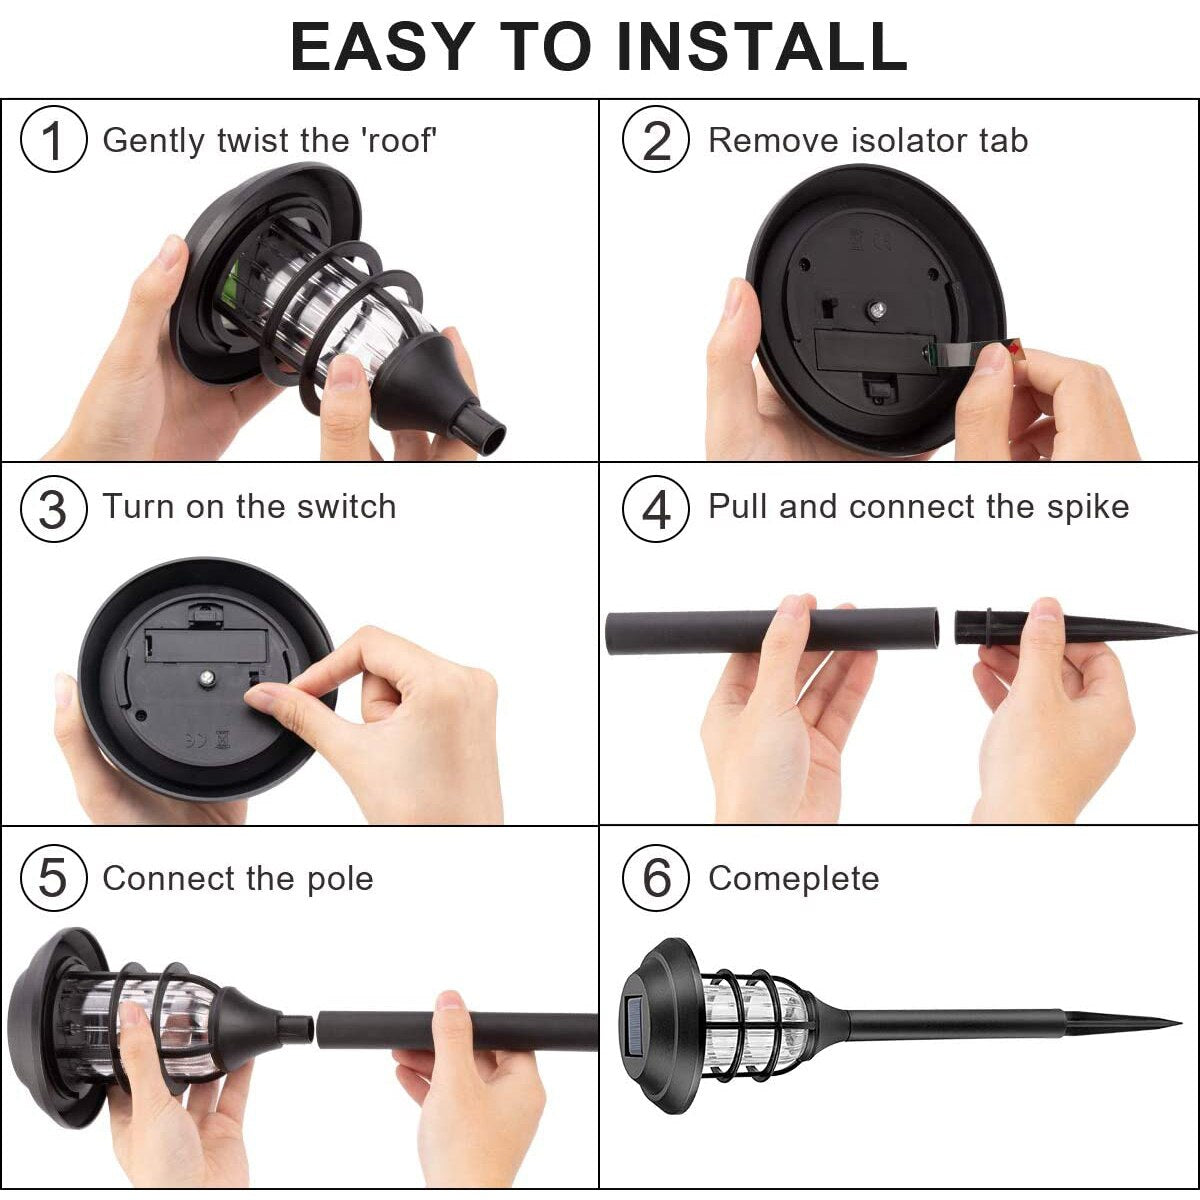 EASY TO INSTALL Gently twist the 'r